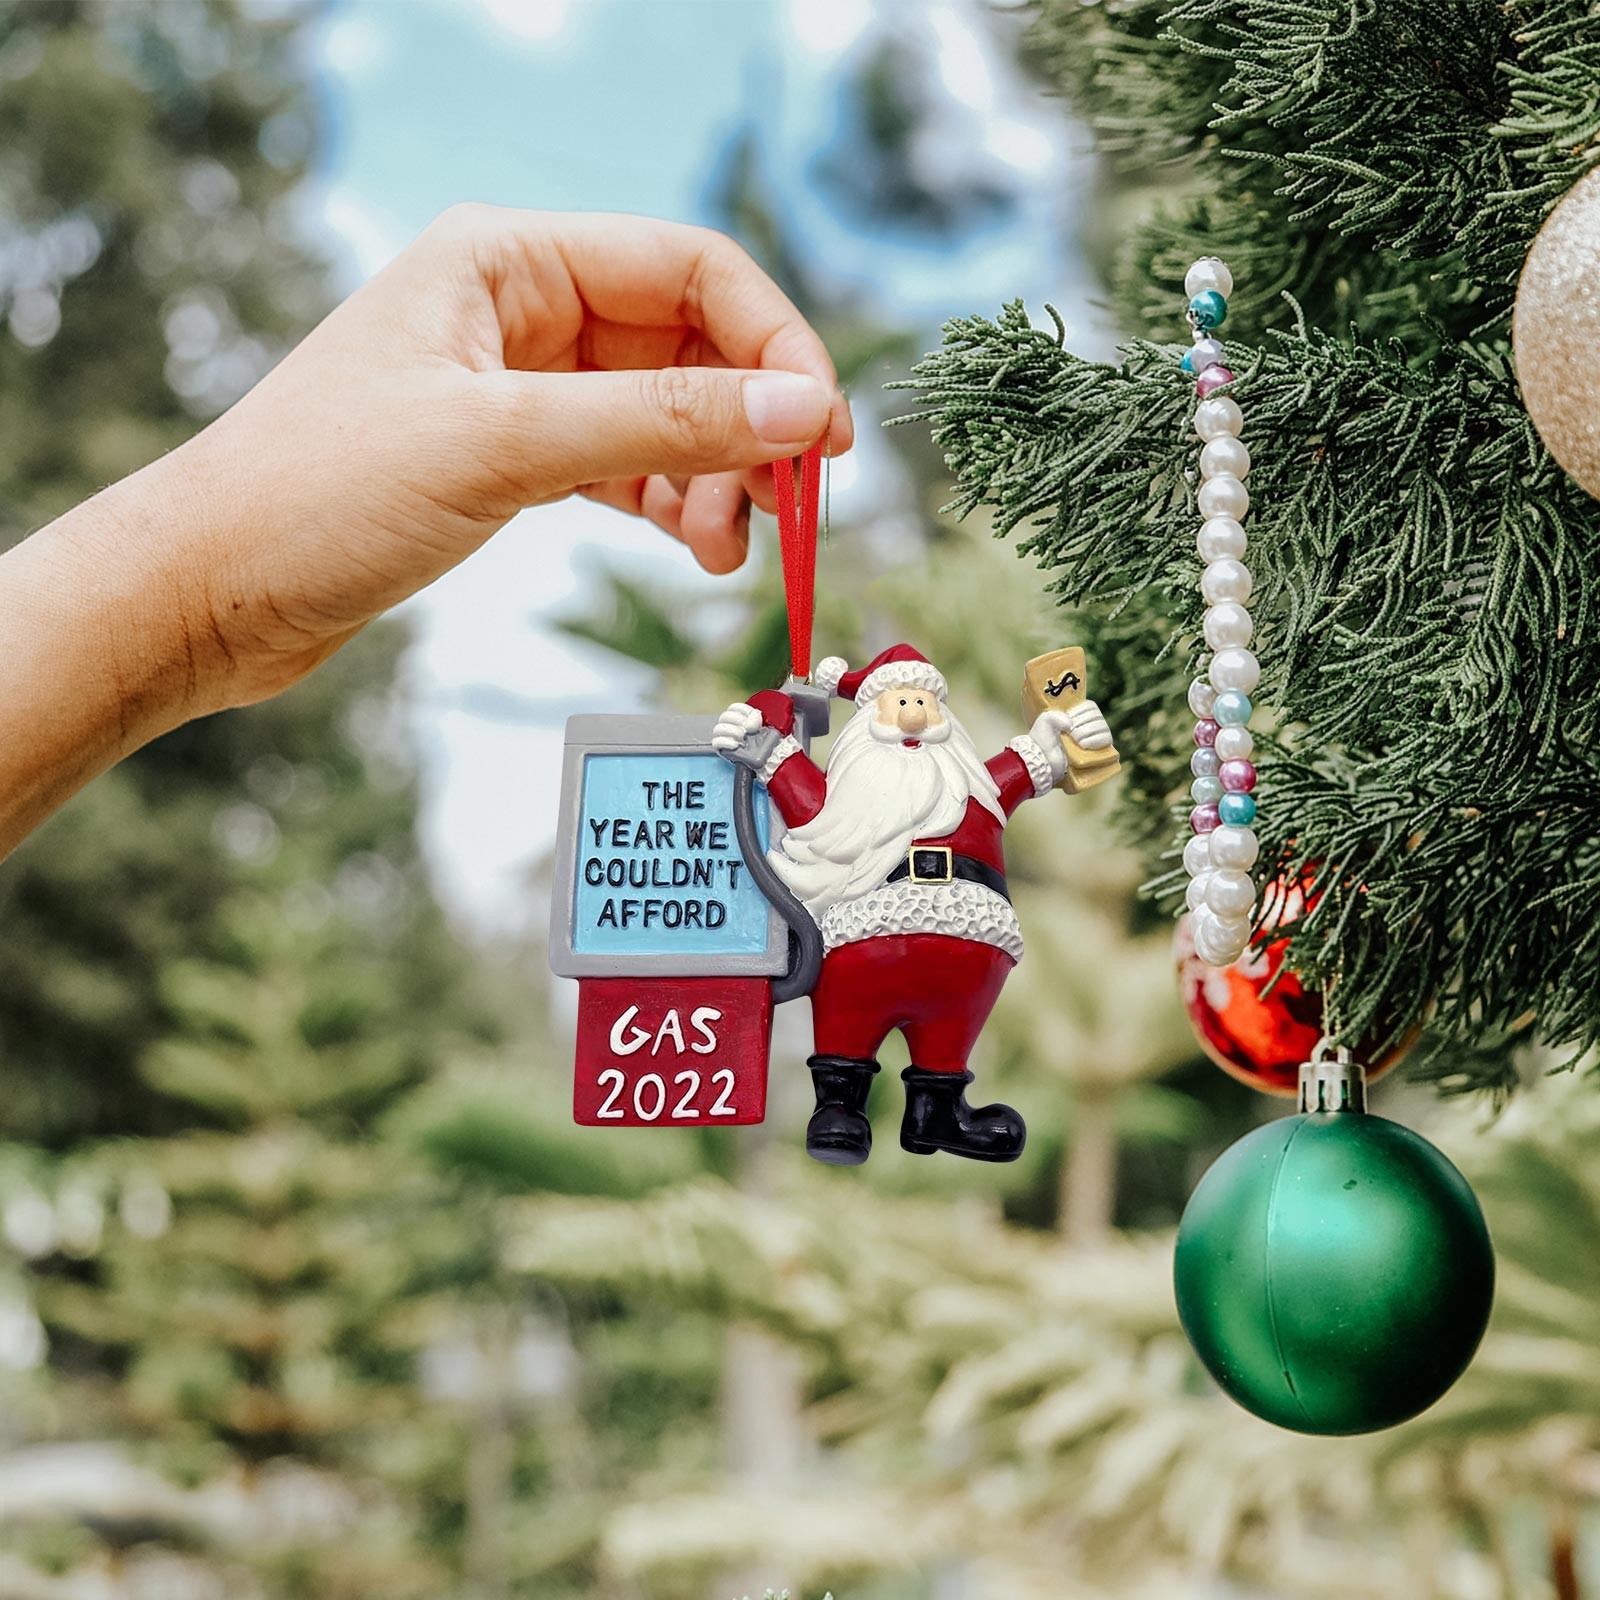 (🎁Early Christmas Sale- 49% OFF🎁)Xmas Santa Claus Ornaments🌲BUY 2 GET 1 FREE